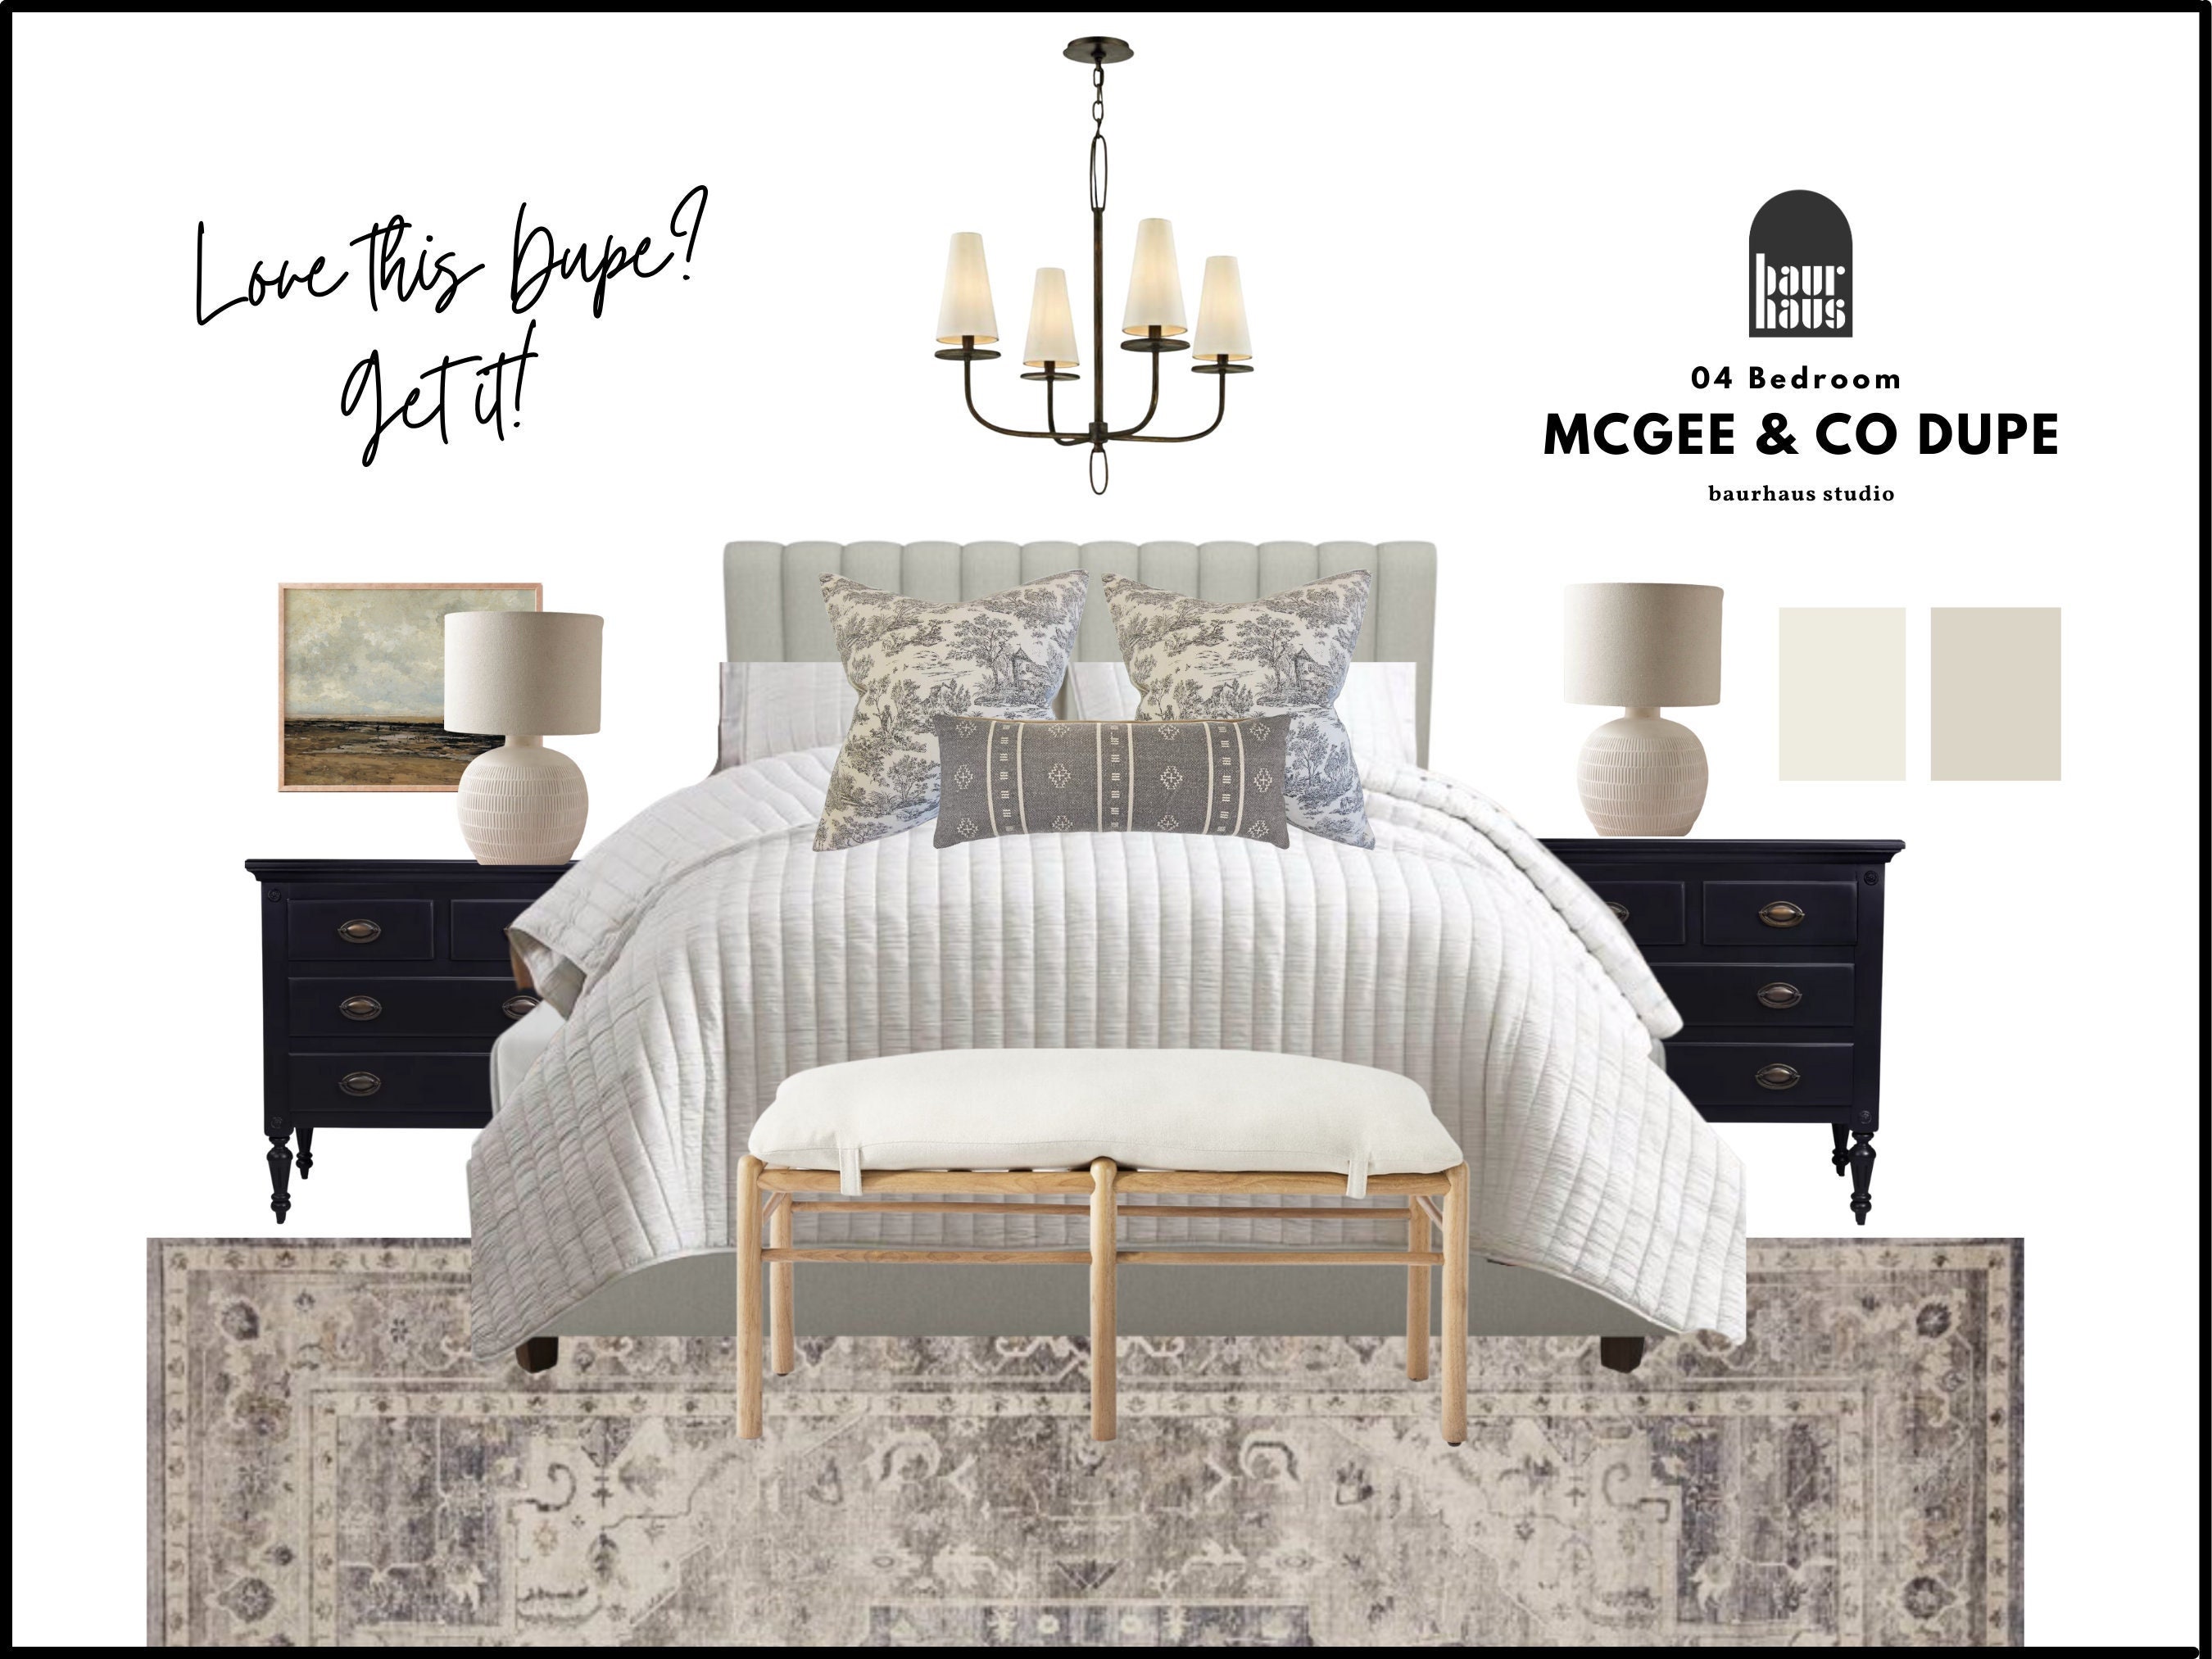 Duped Mcgee & Co Bedroom Packagestudio Mcgee Bedbedroom - Etsy